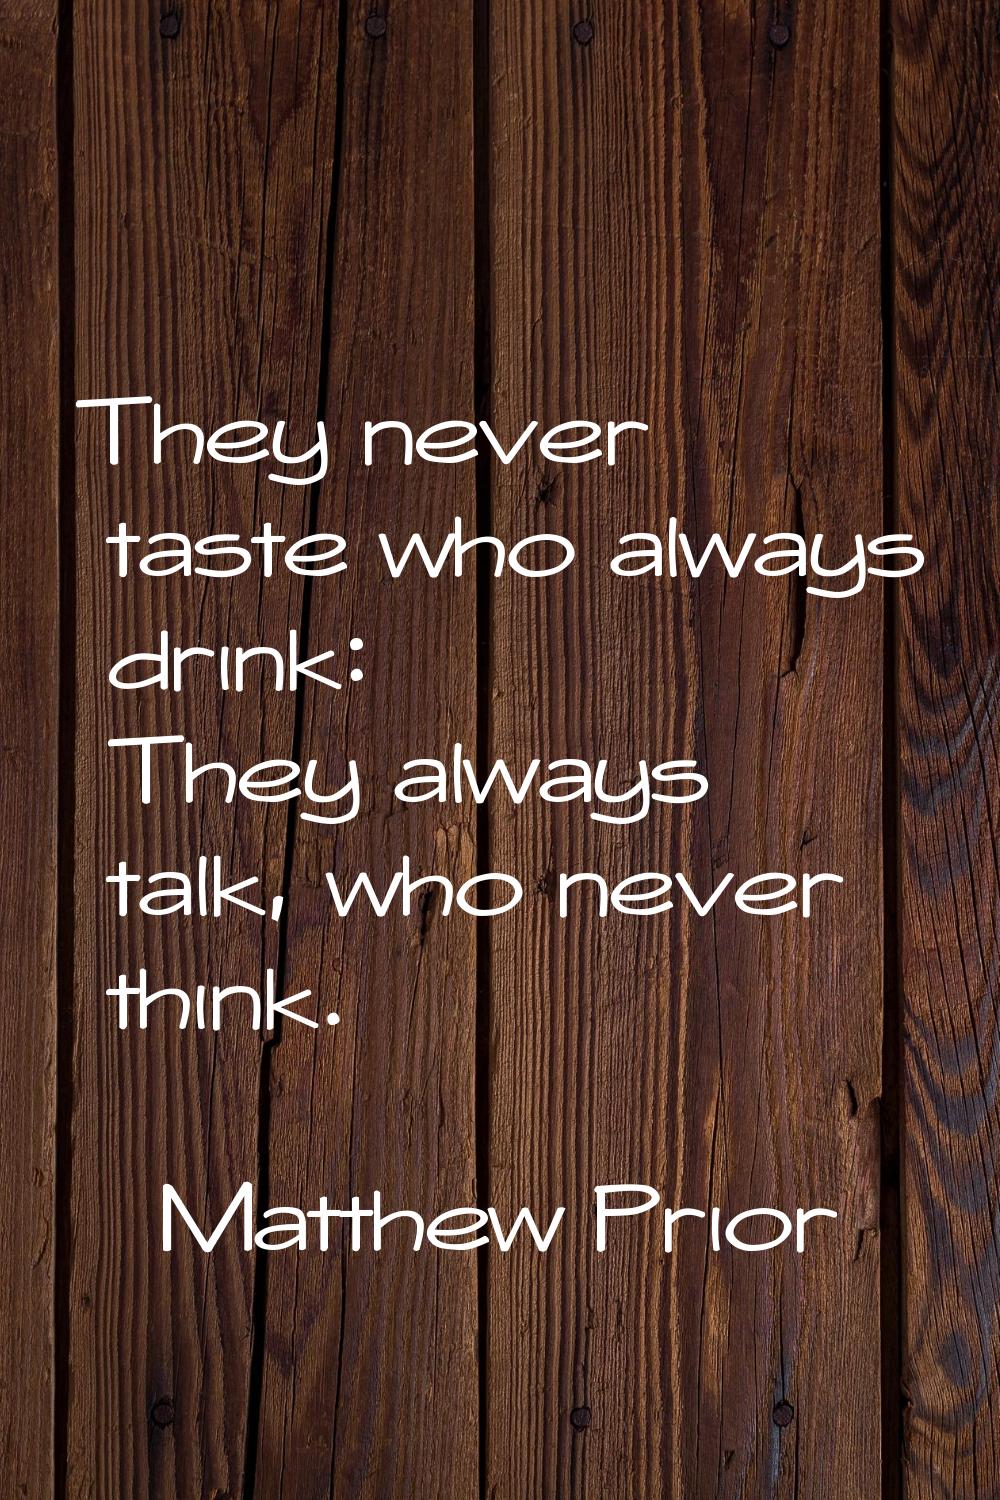 They never taste who always drink: They always talk, who never think.